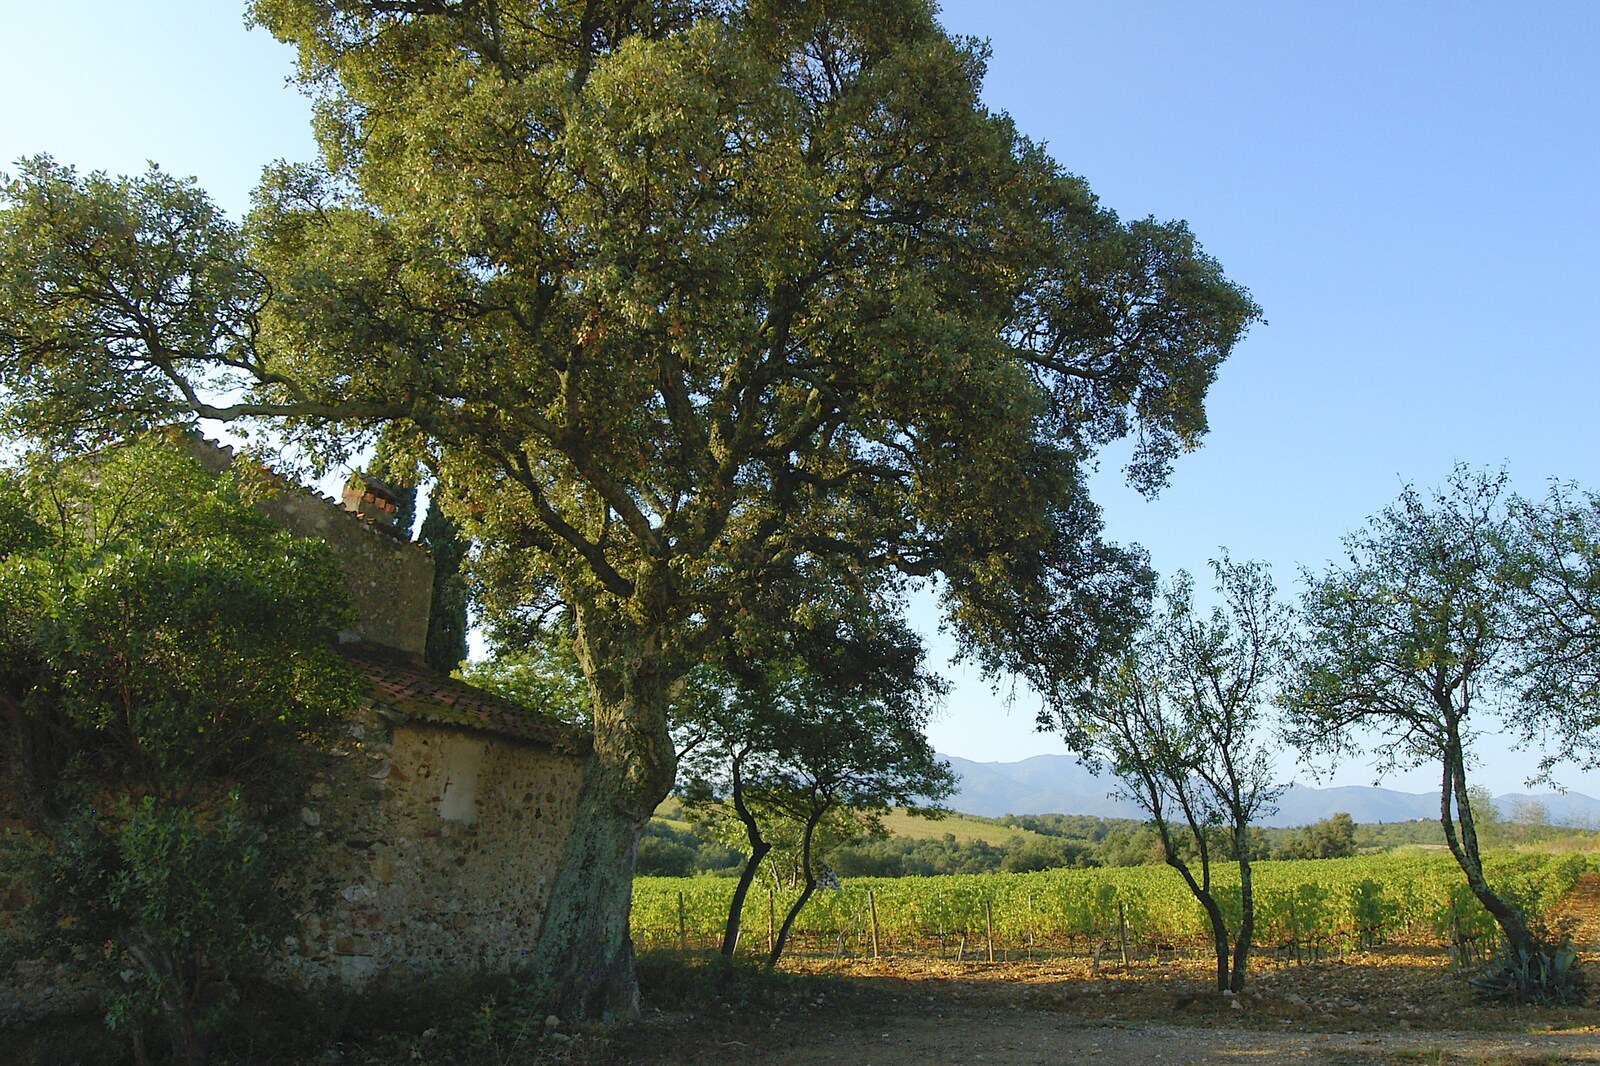 A big tree by a wrecked building from Grape Picking and Pressing, Roussillon, France - 19th September 2006